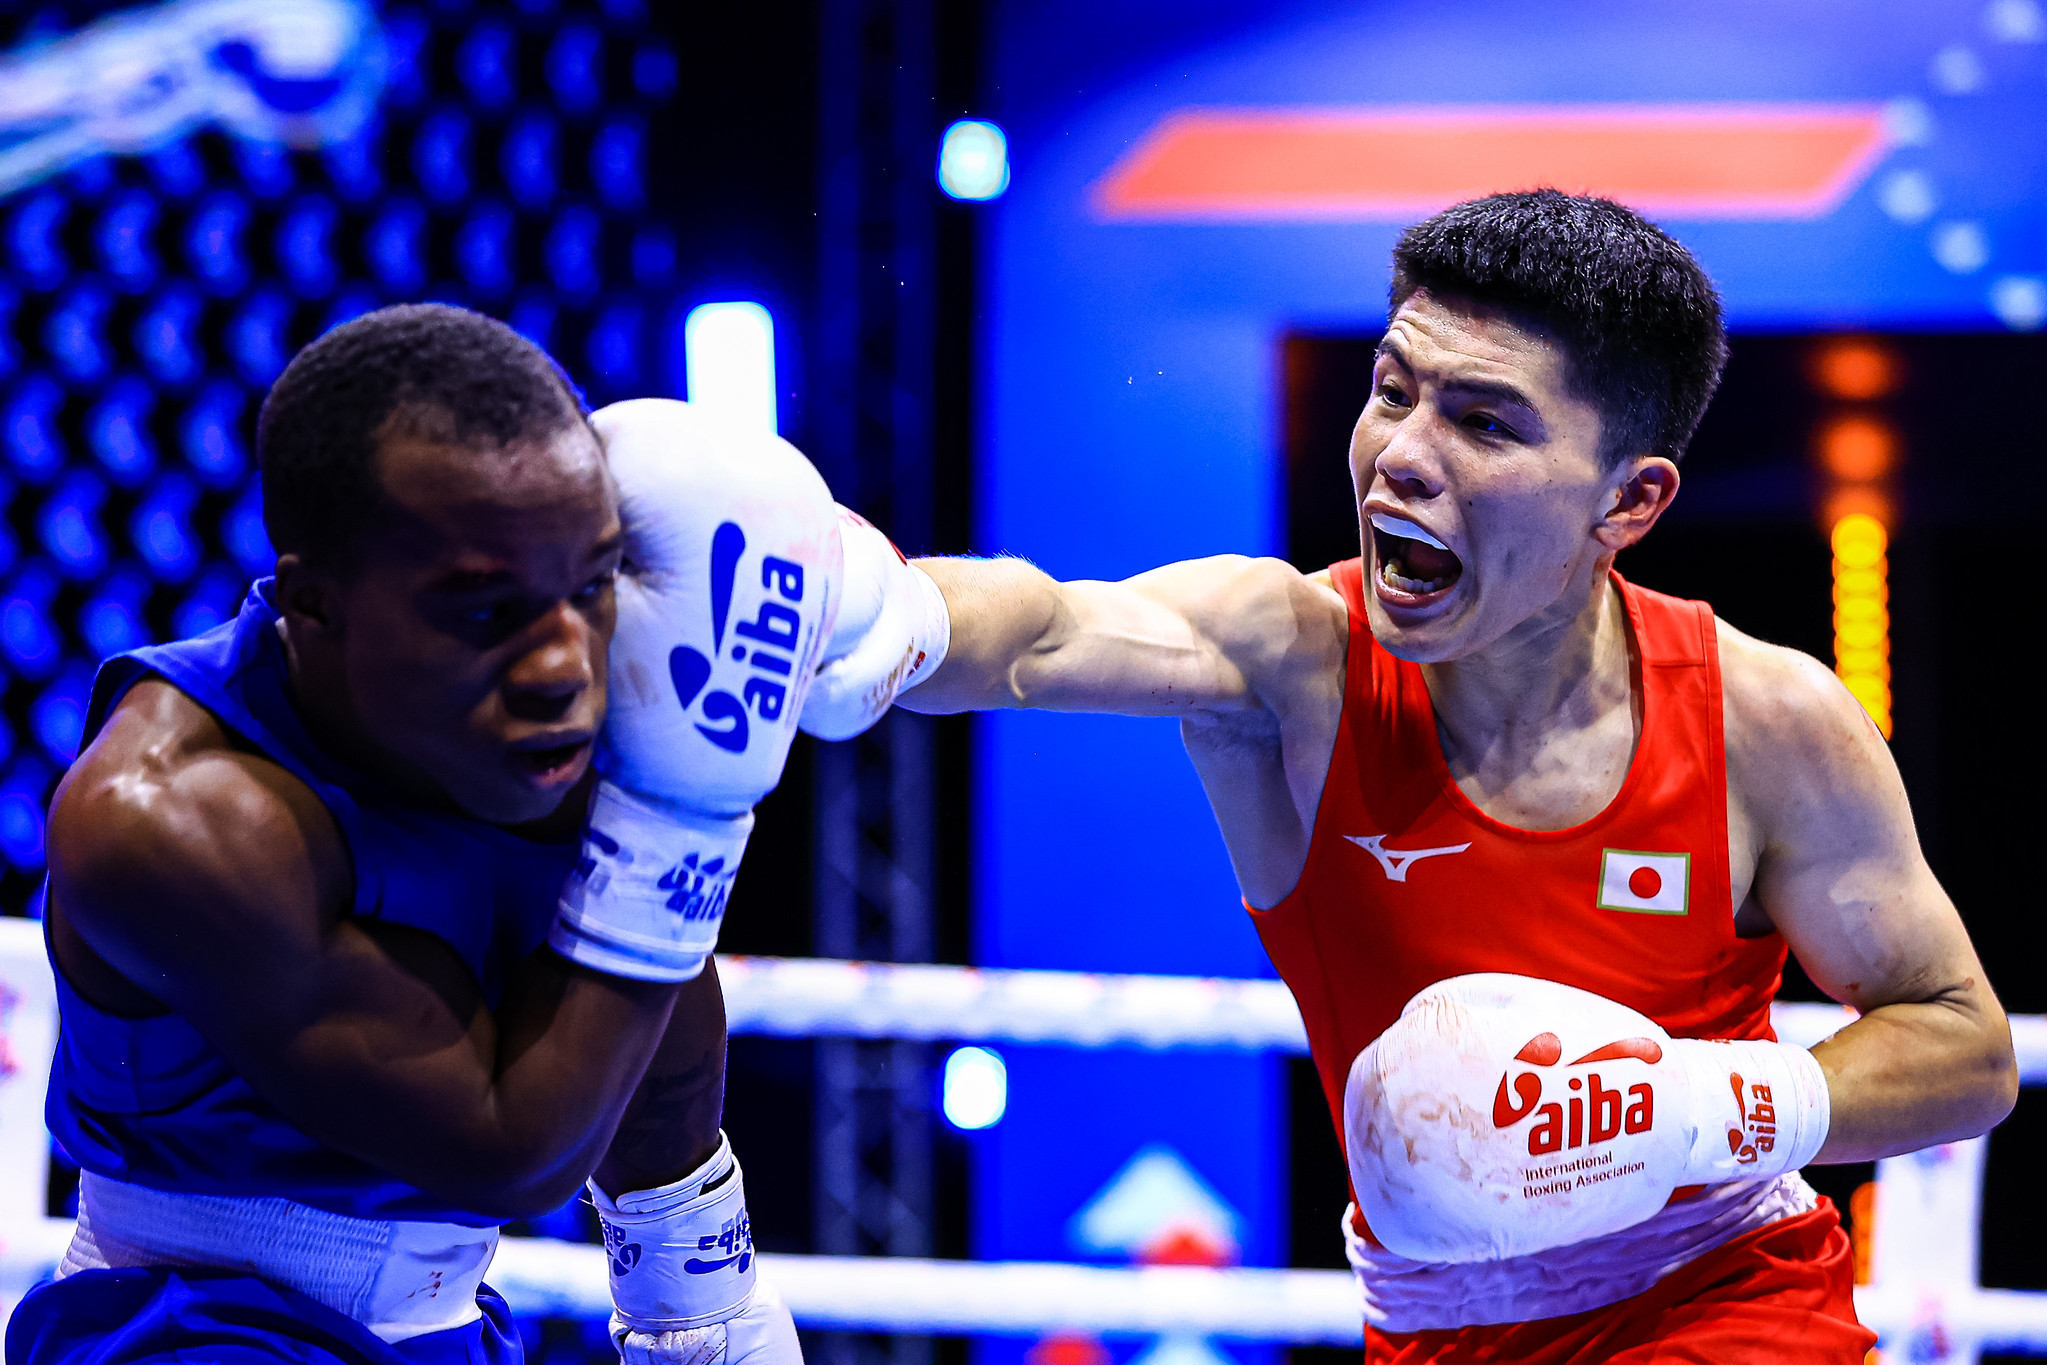 Japan's Tomoya Tsuboi stopped Jabali Breedy for clinching a medal for Barbados in the under-54kg ©AIBA